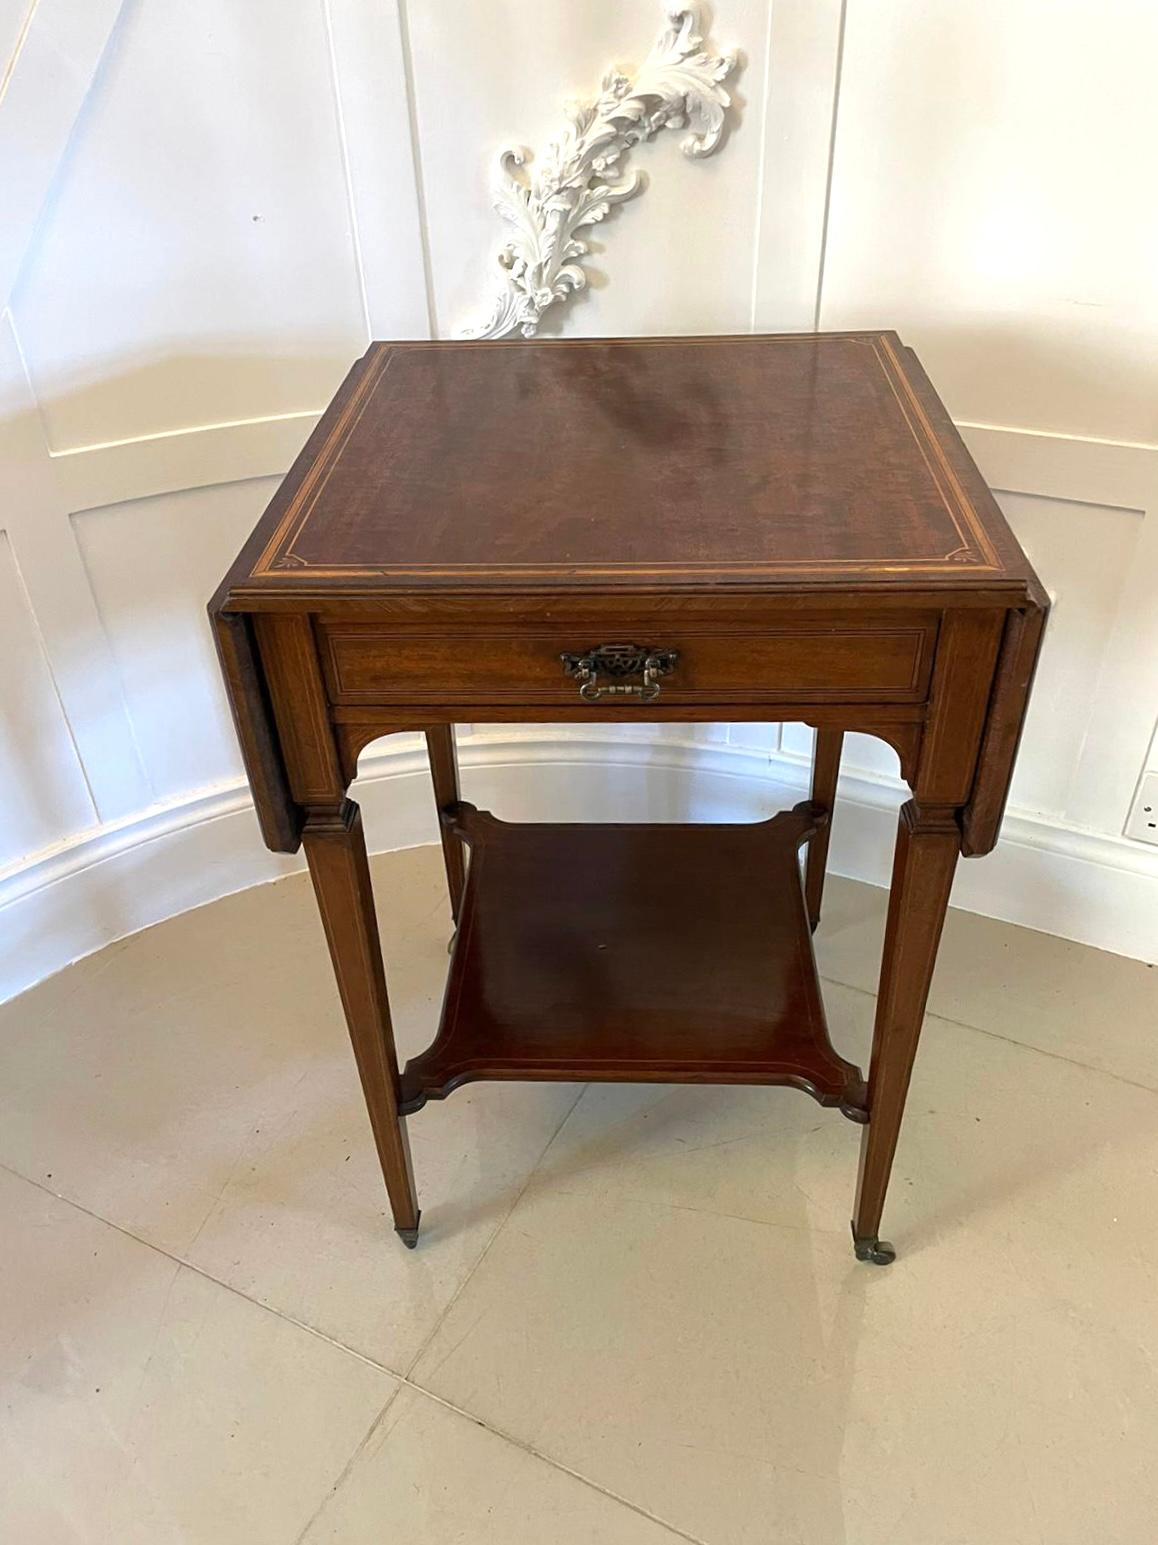 Fine quality antique Edwardian antique inlaid mahogany occasional / lamp table having a lovely mahogany top with two drop leaves and satinwood inlay, one frieze drawer with original handle, standing on four square elegant tapering legs with original